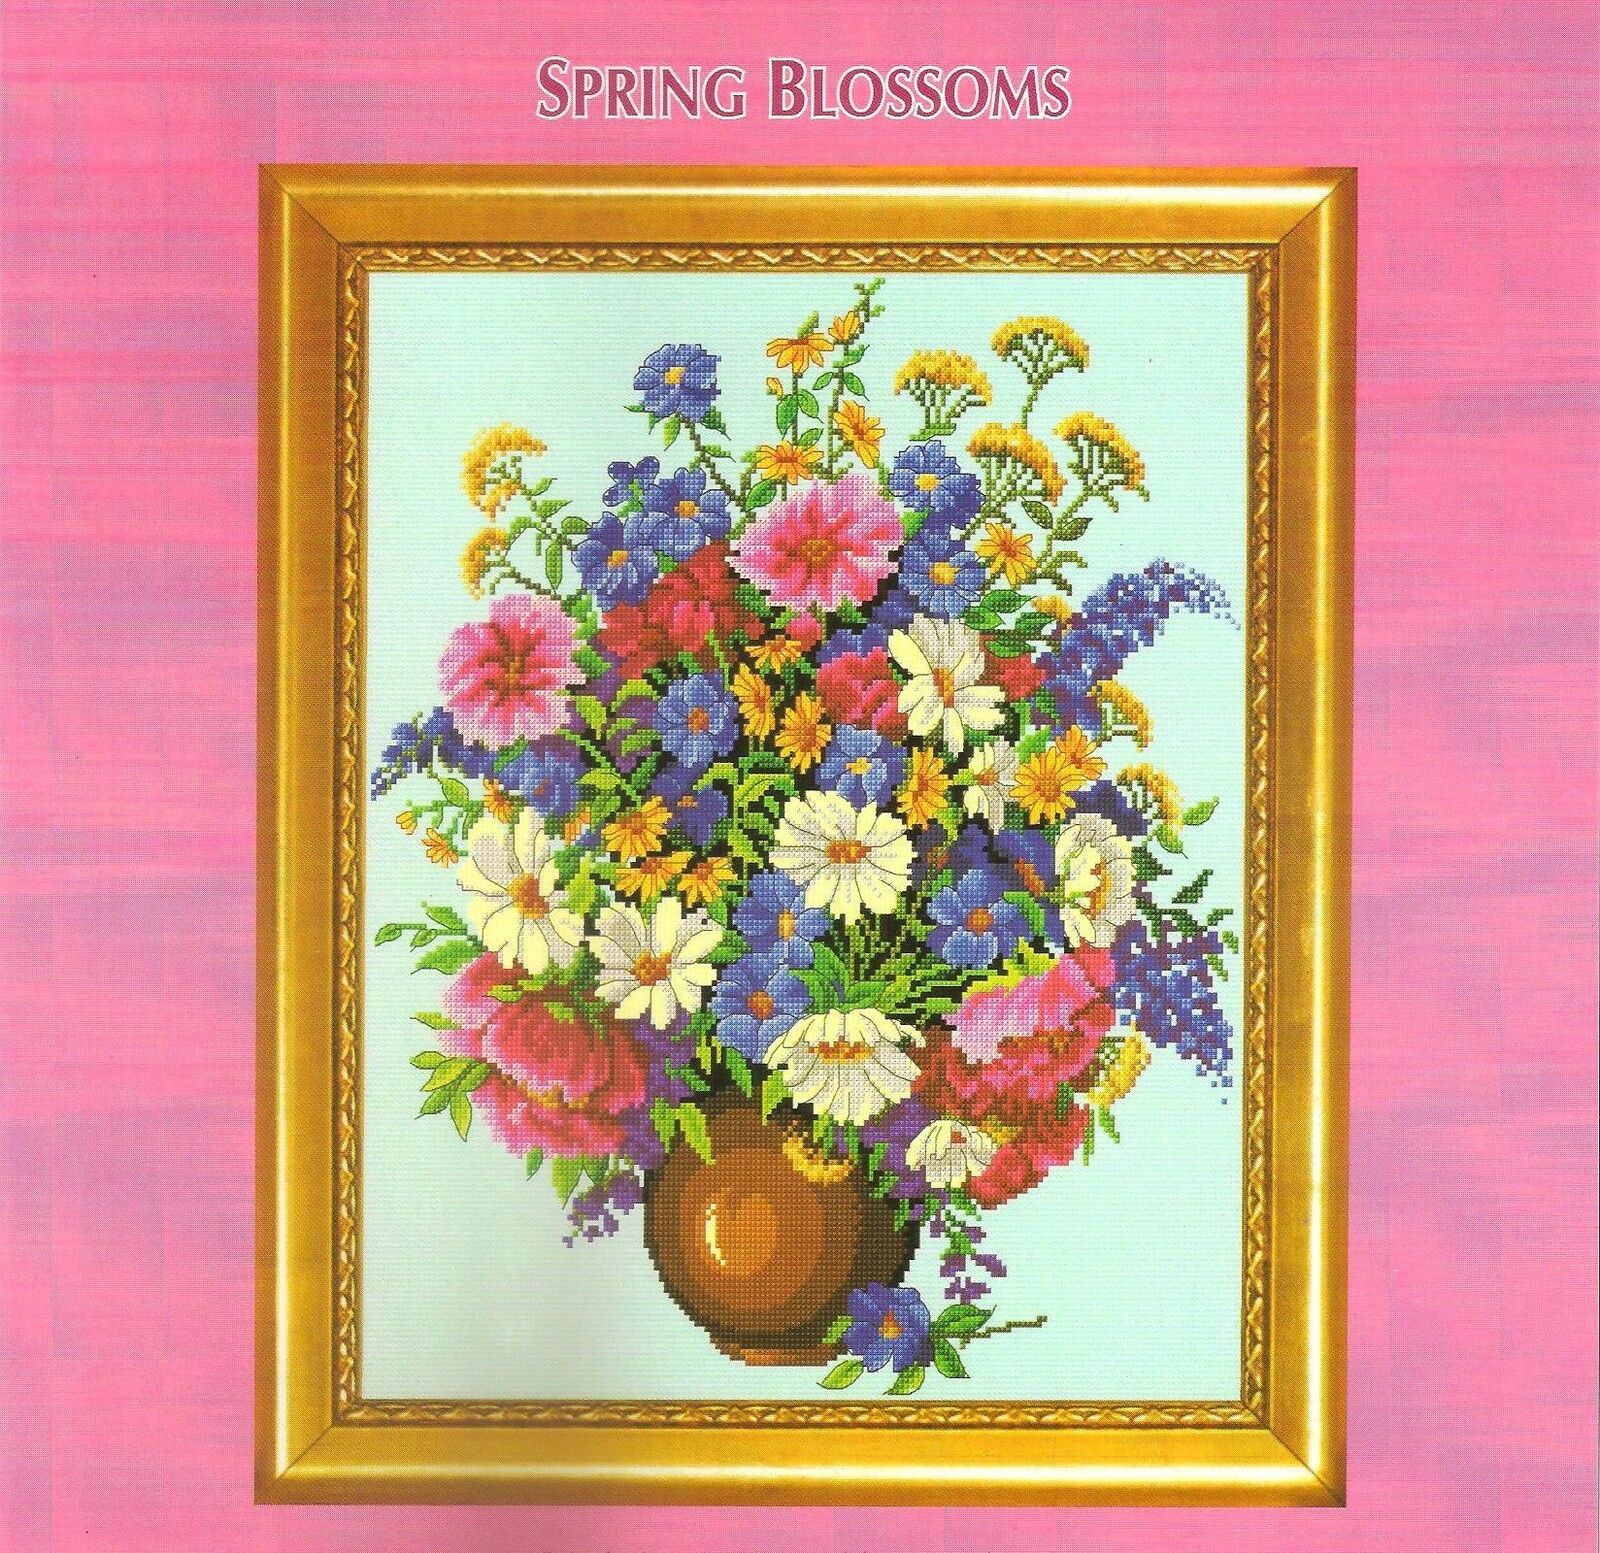 SALE!!! COMPLETE CROSS STITCH MATERIALS "SPRING BLOSSOMS" FREE SHIP - $29.69